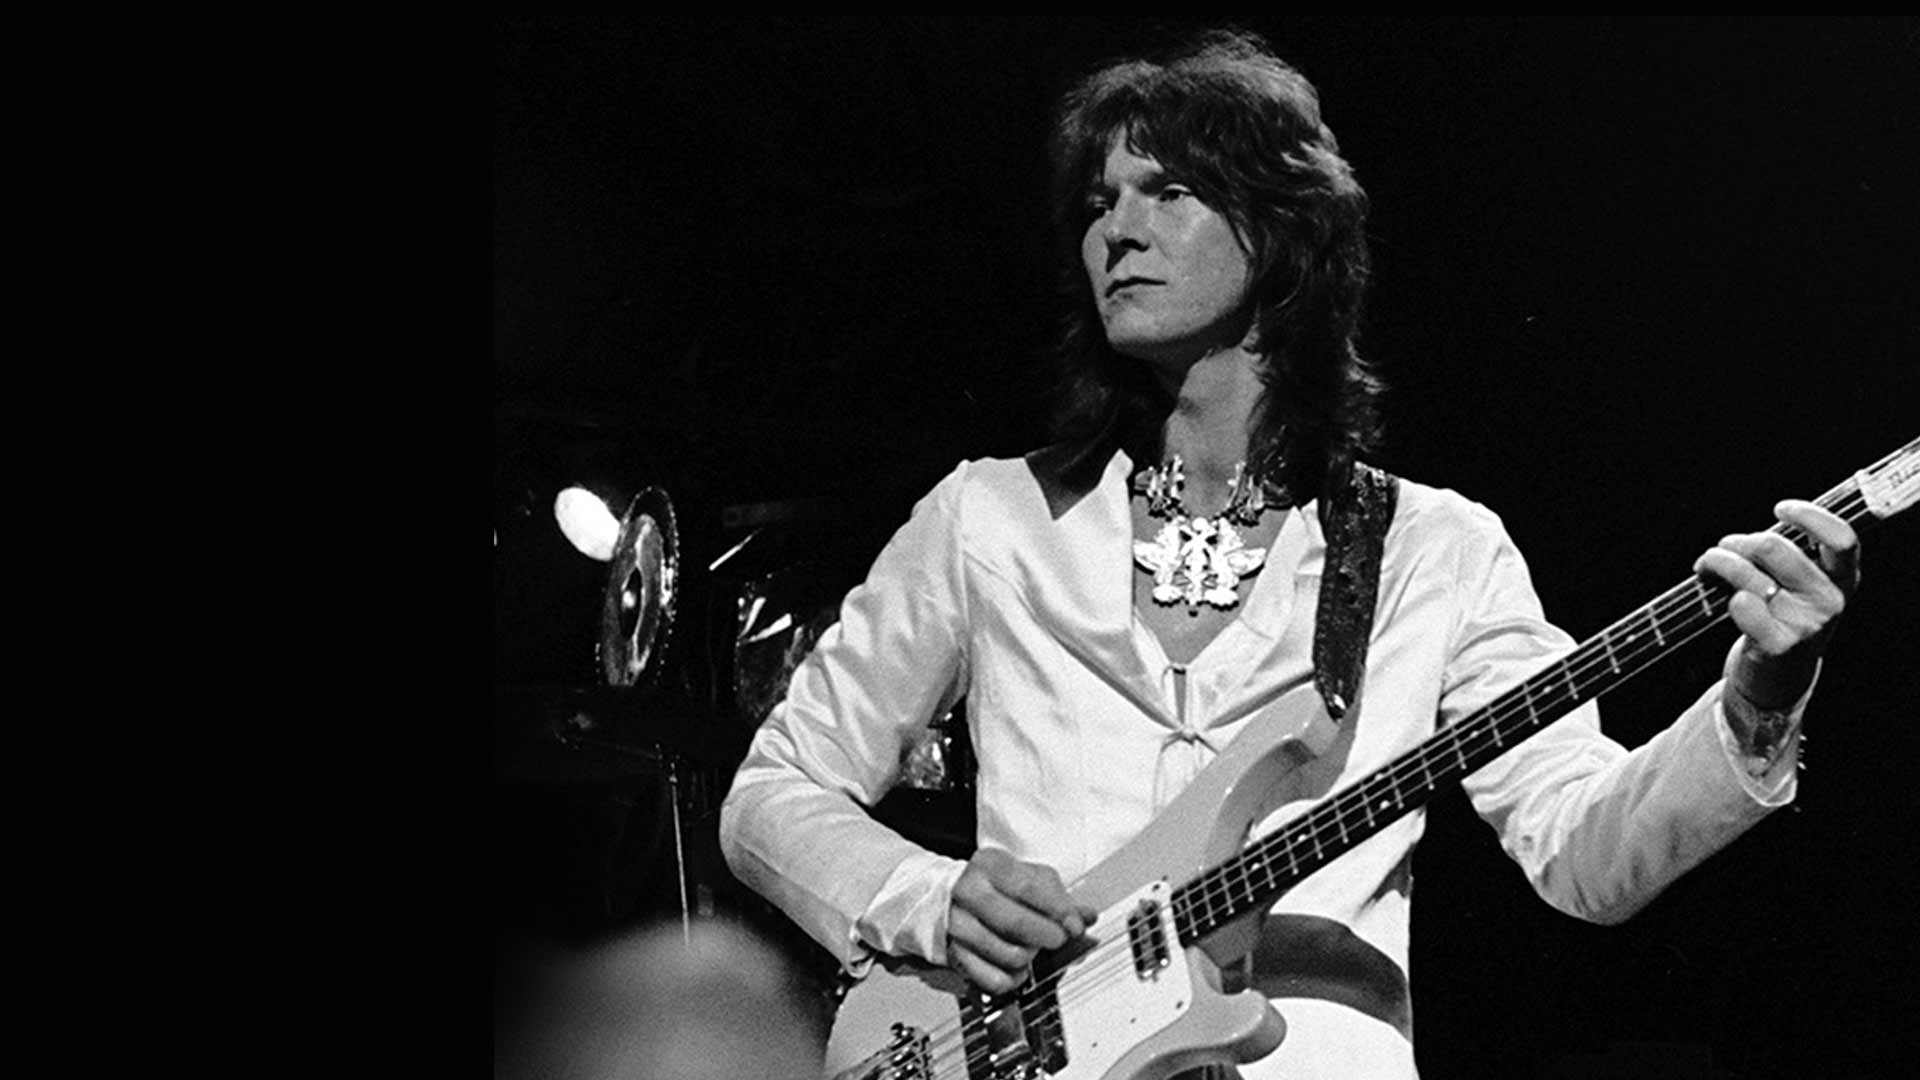 Chris Squire – Life Stories